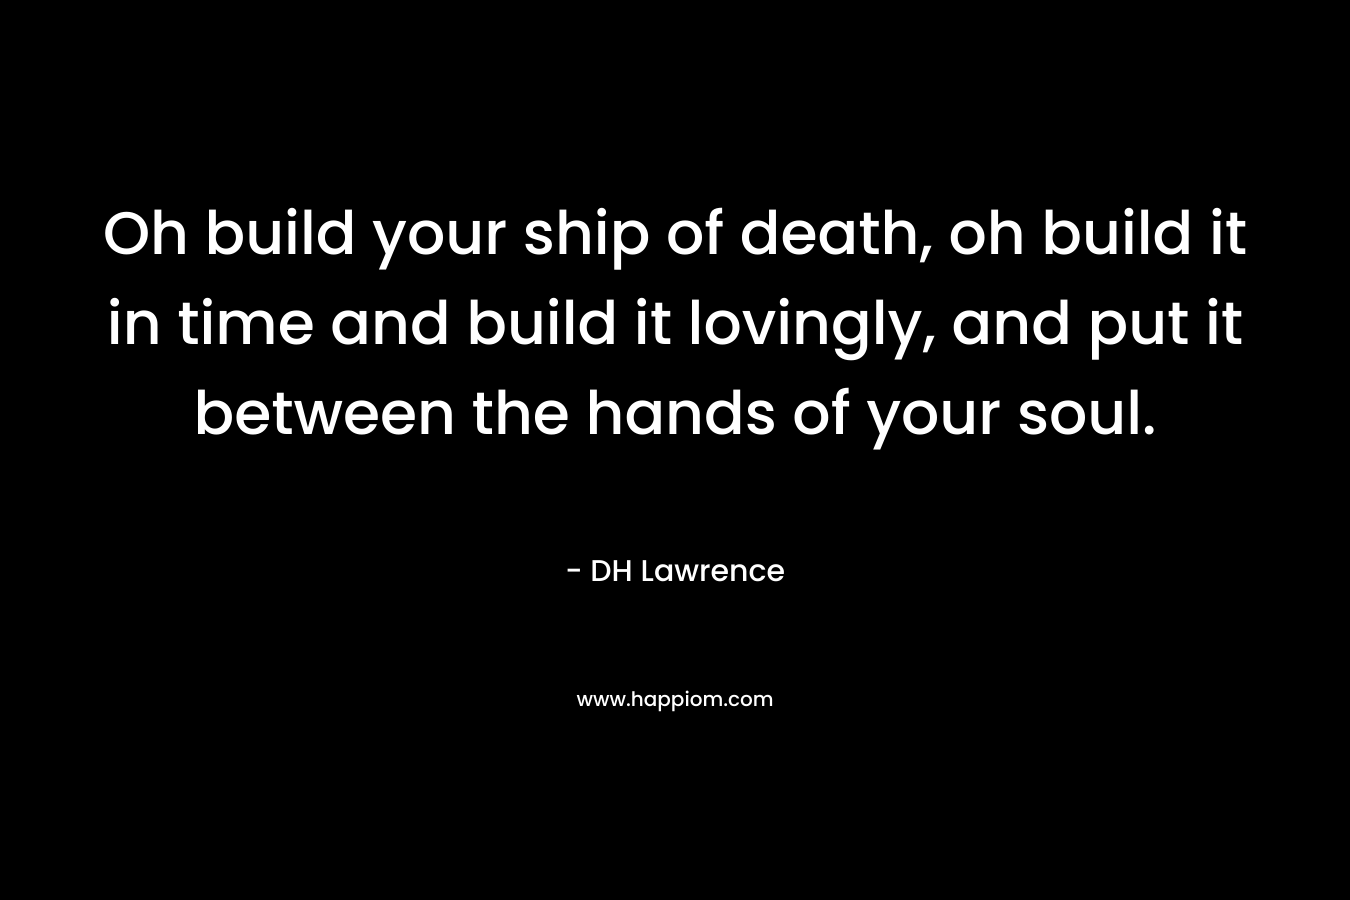 Oh build your ship of death, oh build it in time and build it lovingly, and put it between the hands of your soul. – DH Lawrence